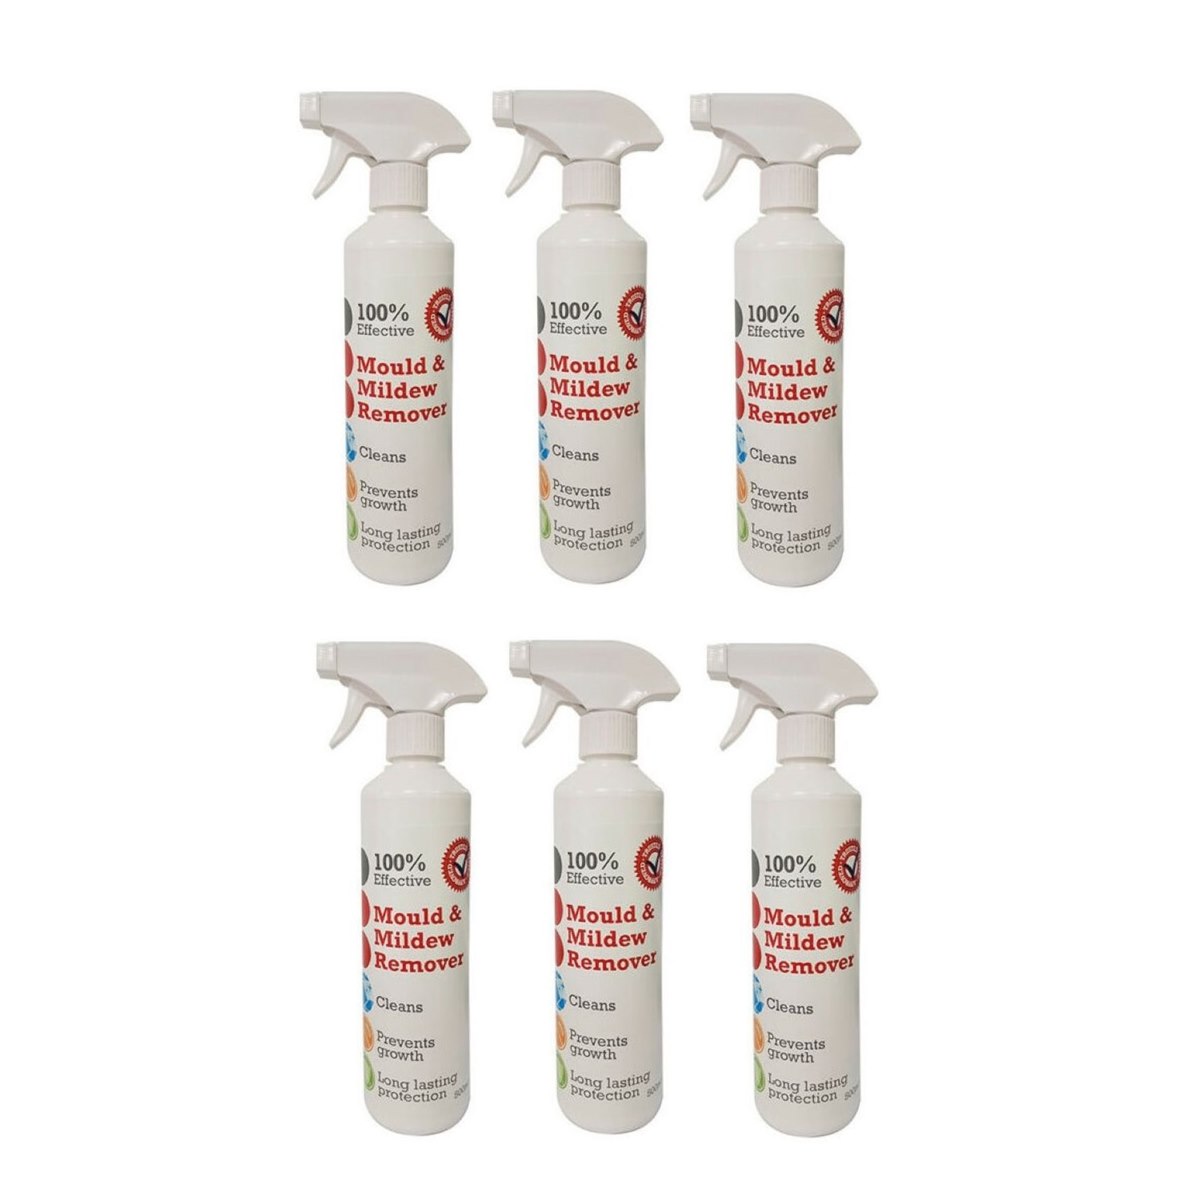 Case of 6 x Wilsons 100% Effective Mould and Mildew Remover Spray 500ml 